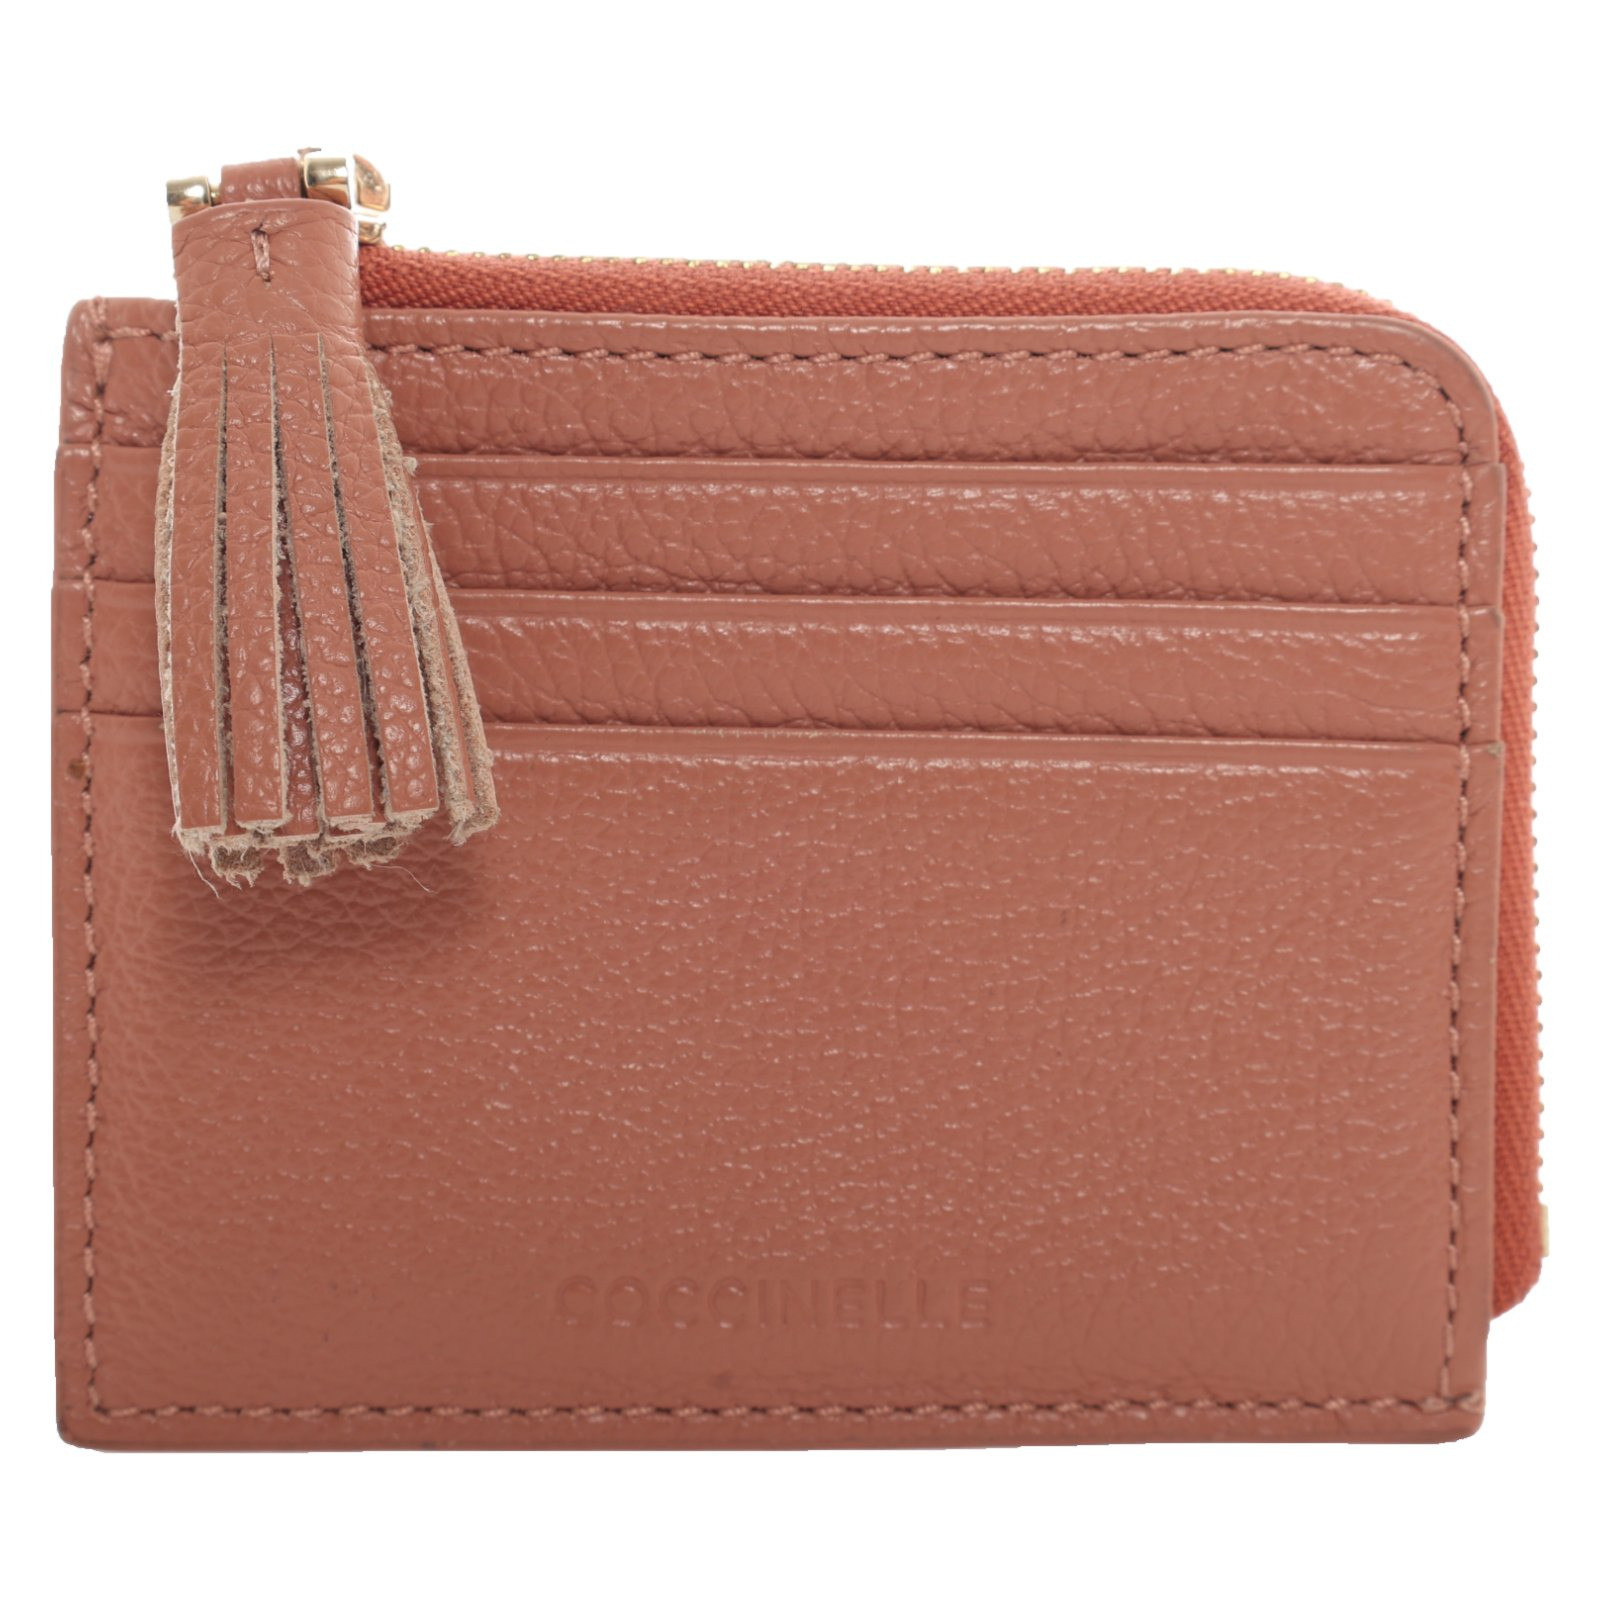 COCCINELLE Women's Bag/Purse Leather in Pink | Second Hand